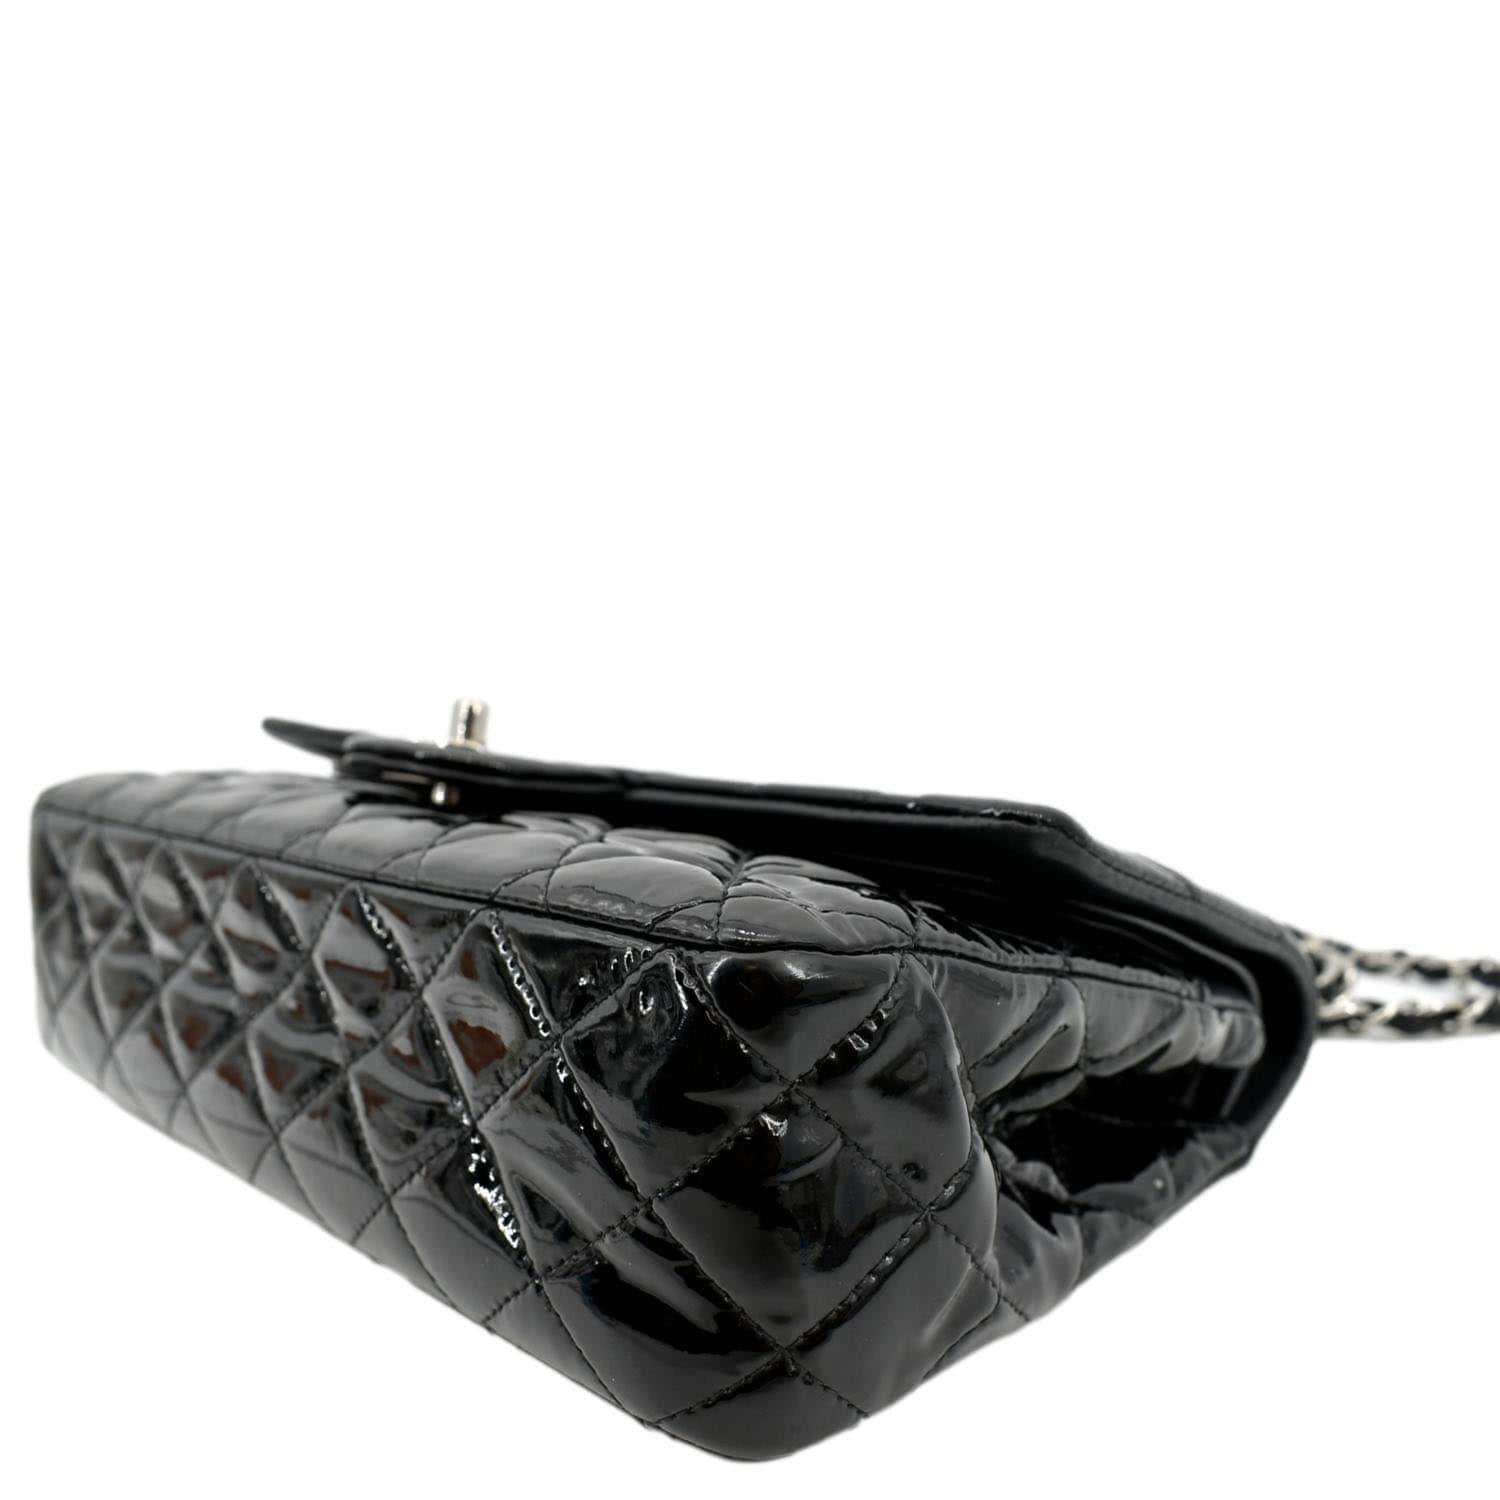 Chanel Black and White Patent Leather Shoulder Strap bag